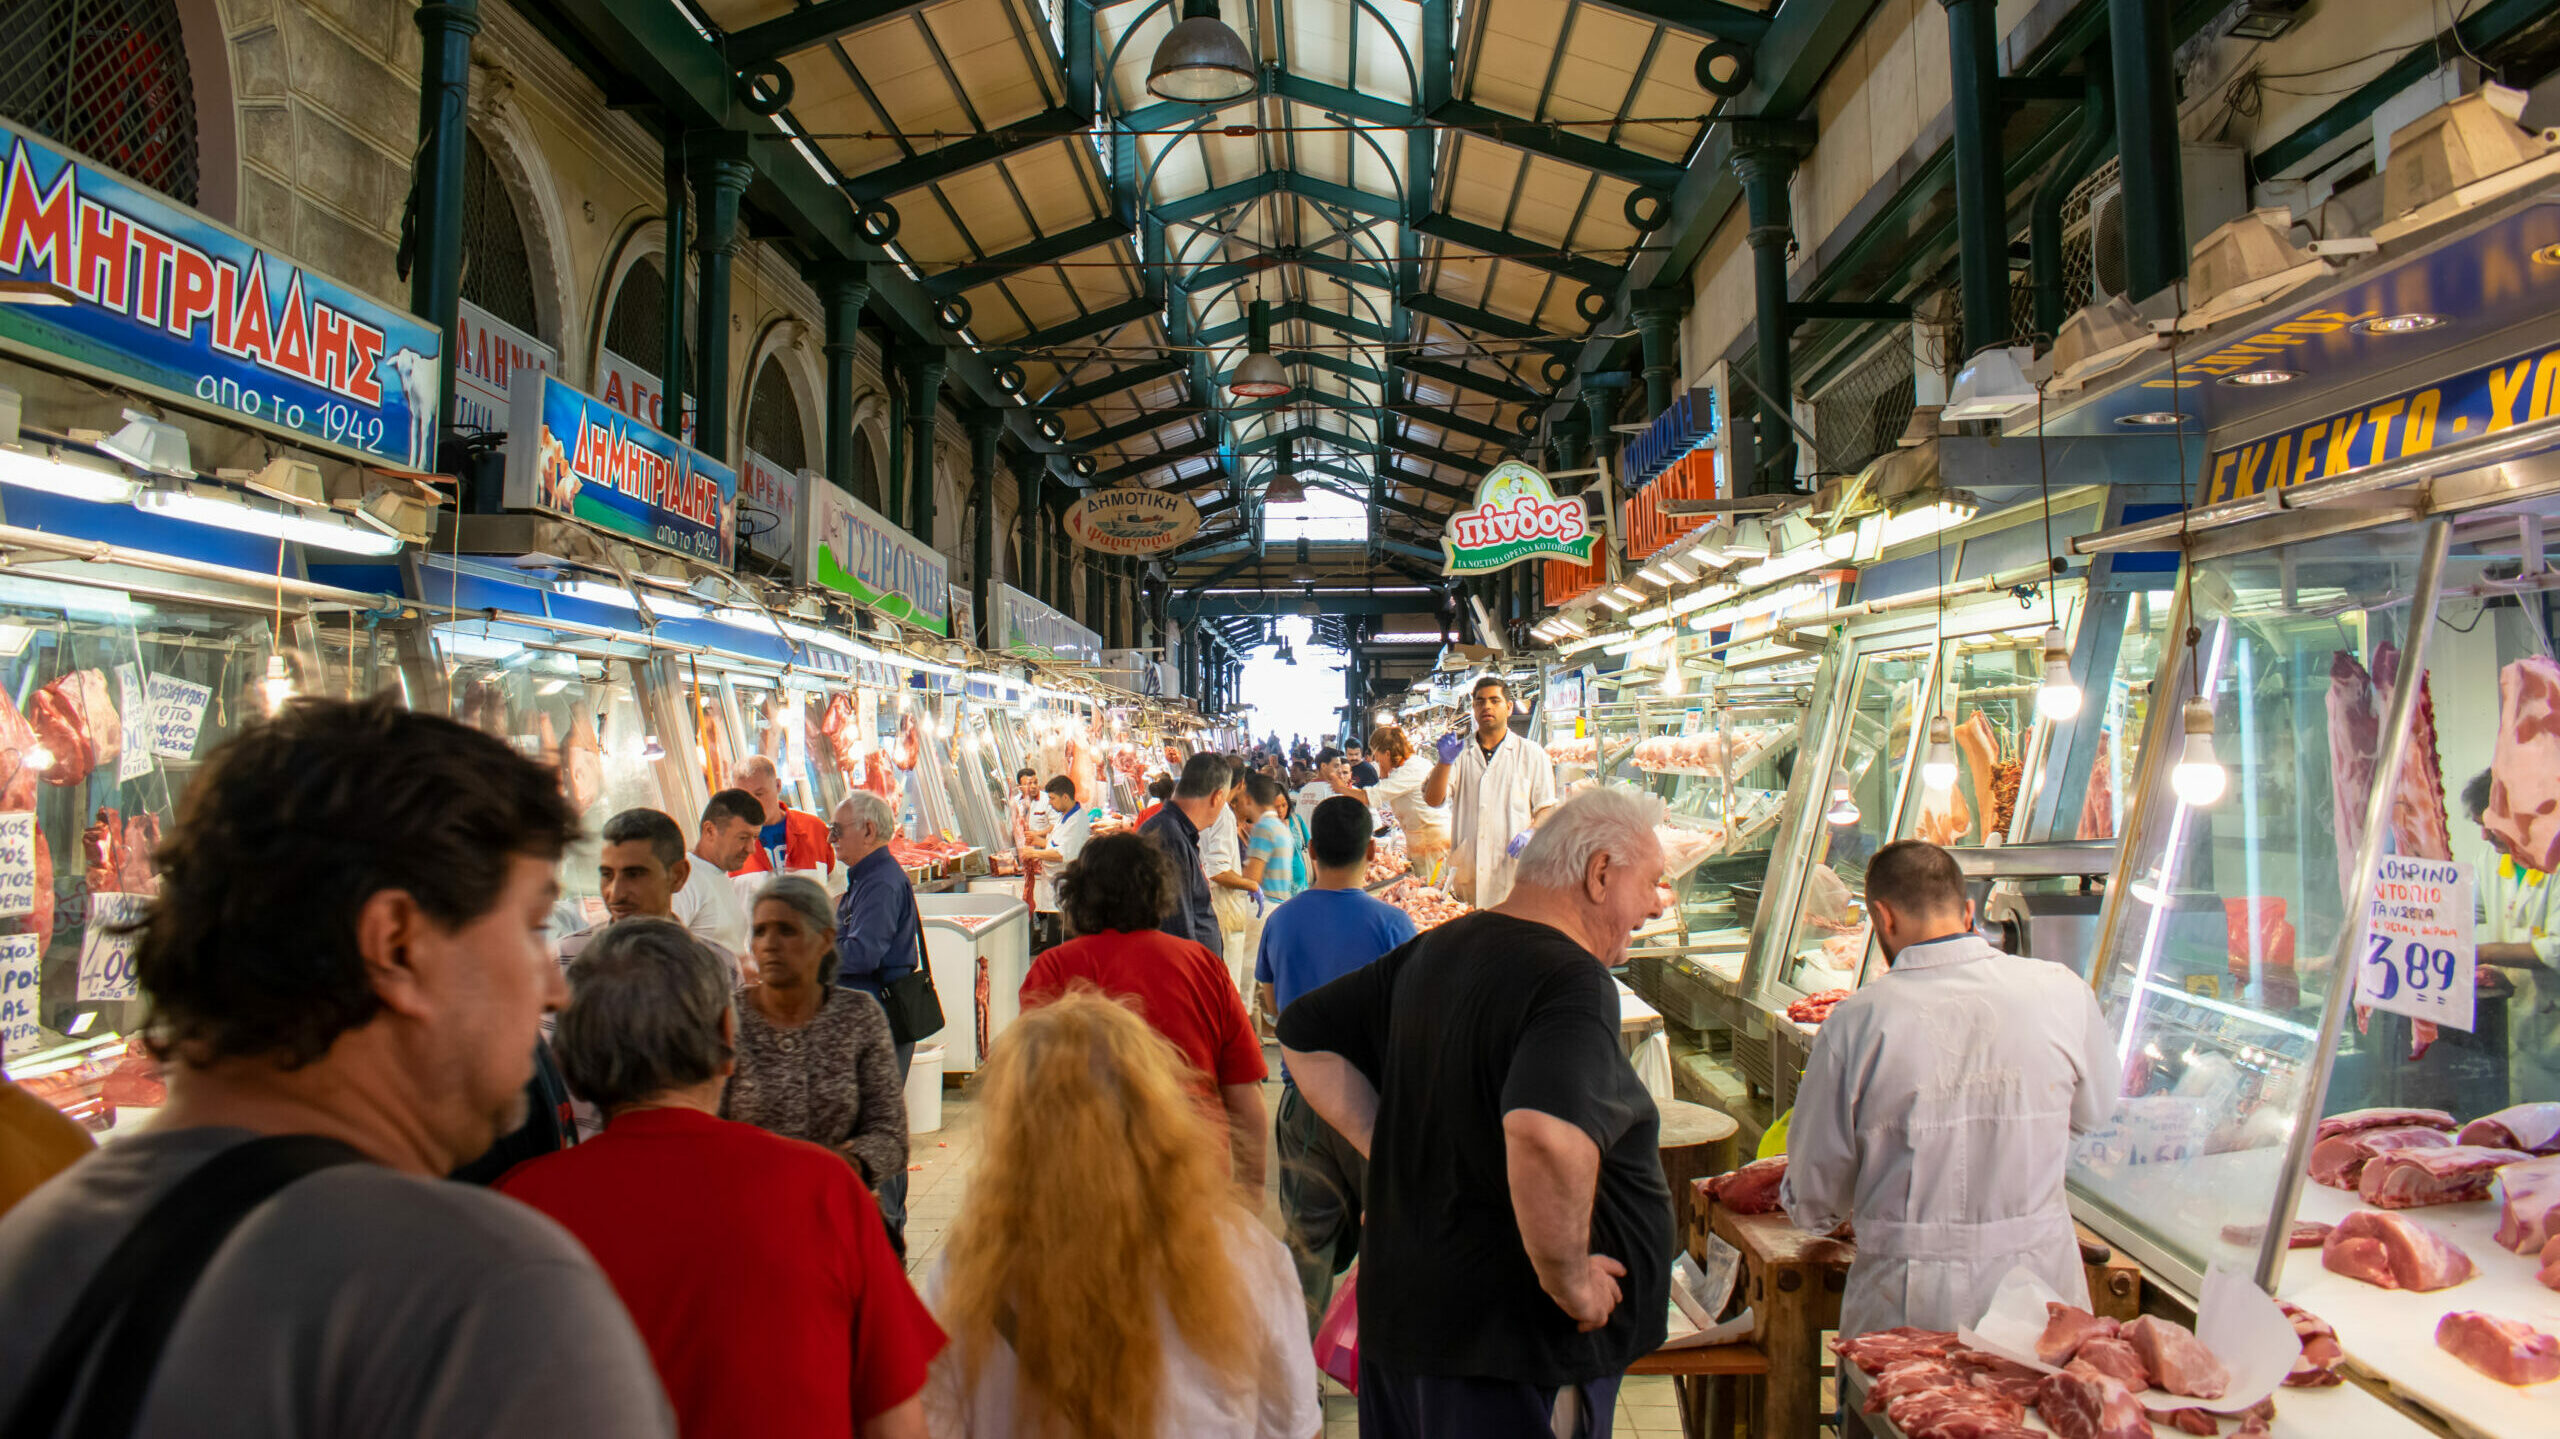 The Varvakeios market: the story behind the “stomach of Athens”